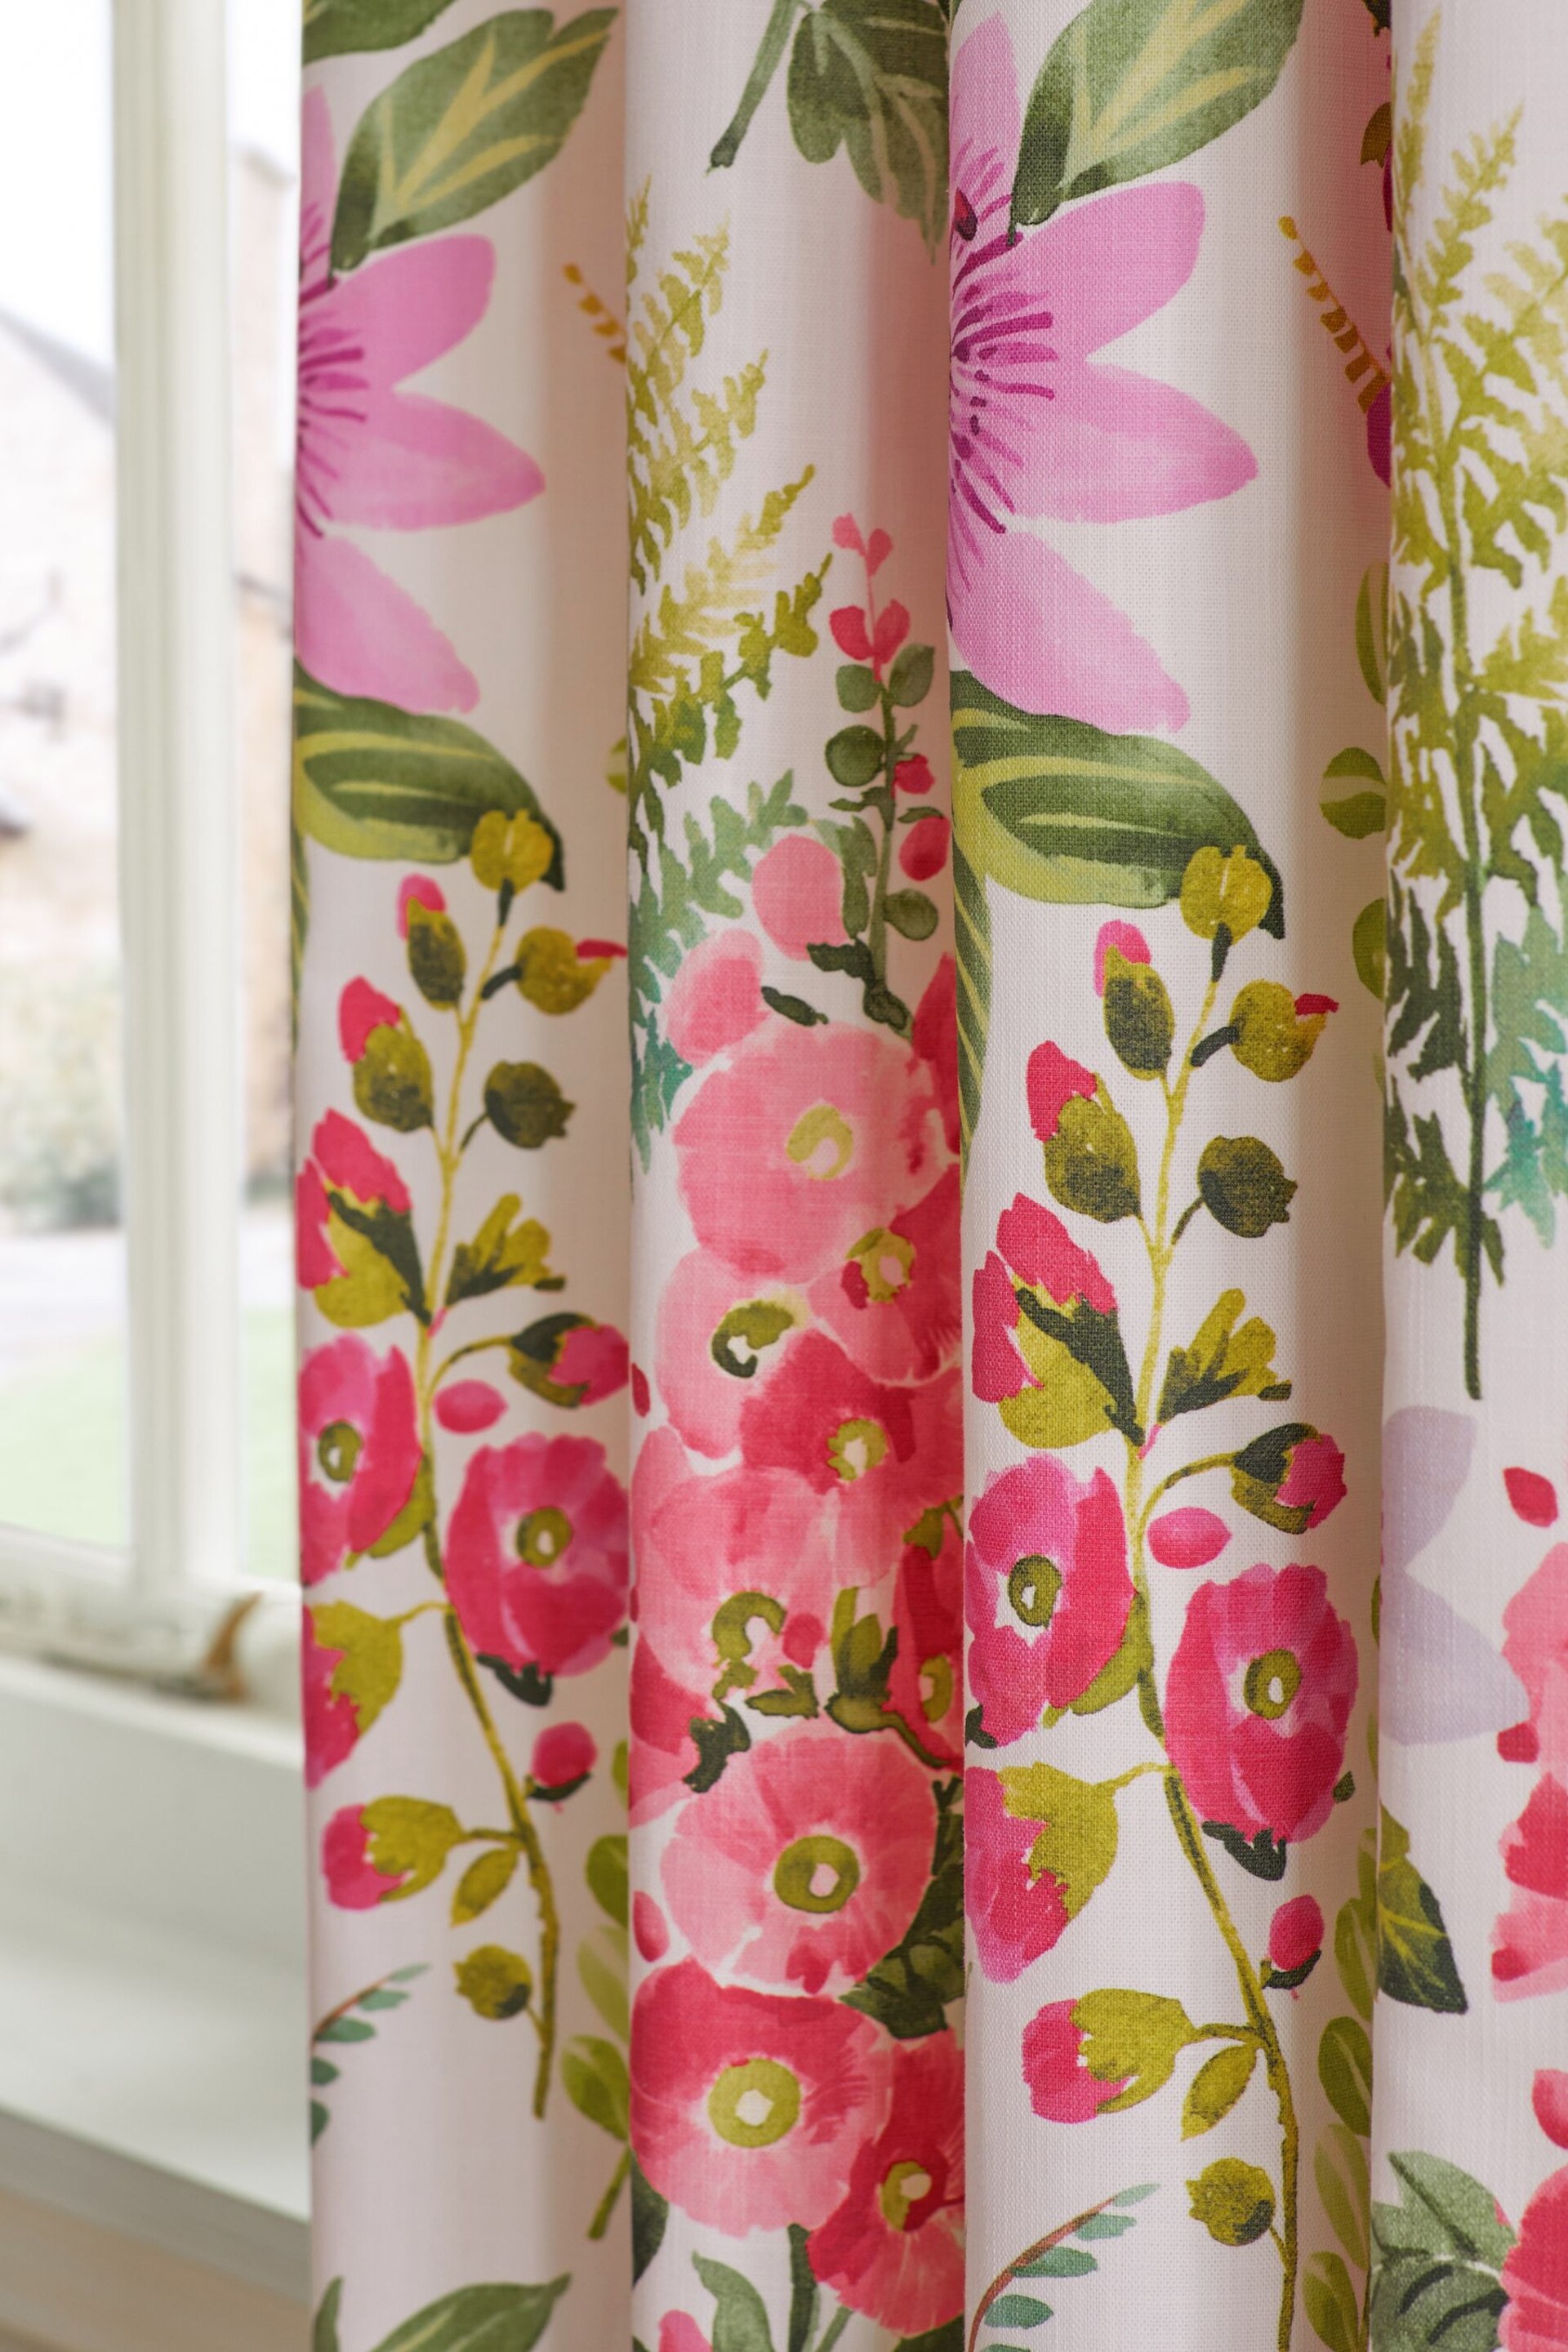 Pink/Green Floral 100% Cotton Eyelet Lined Curtains - Image 3 of 5